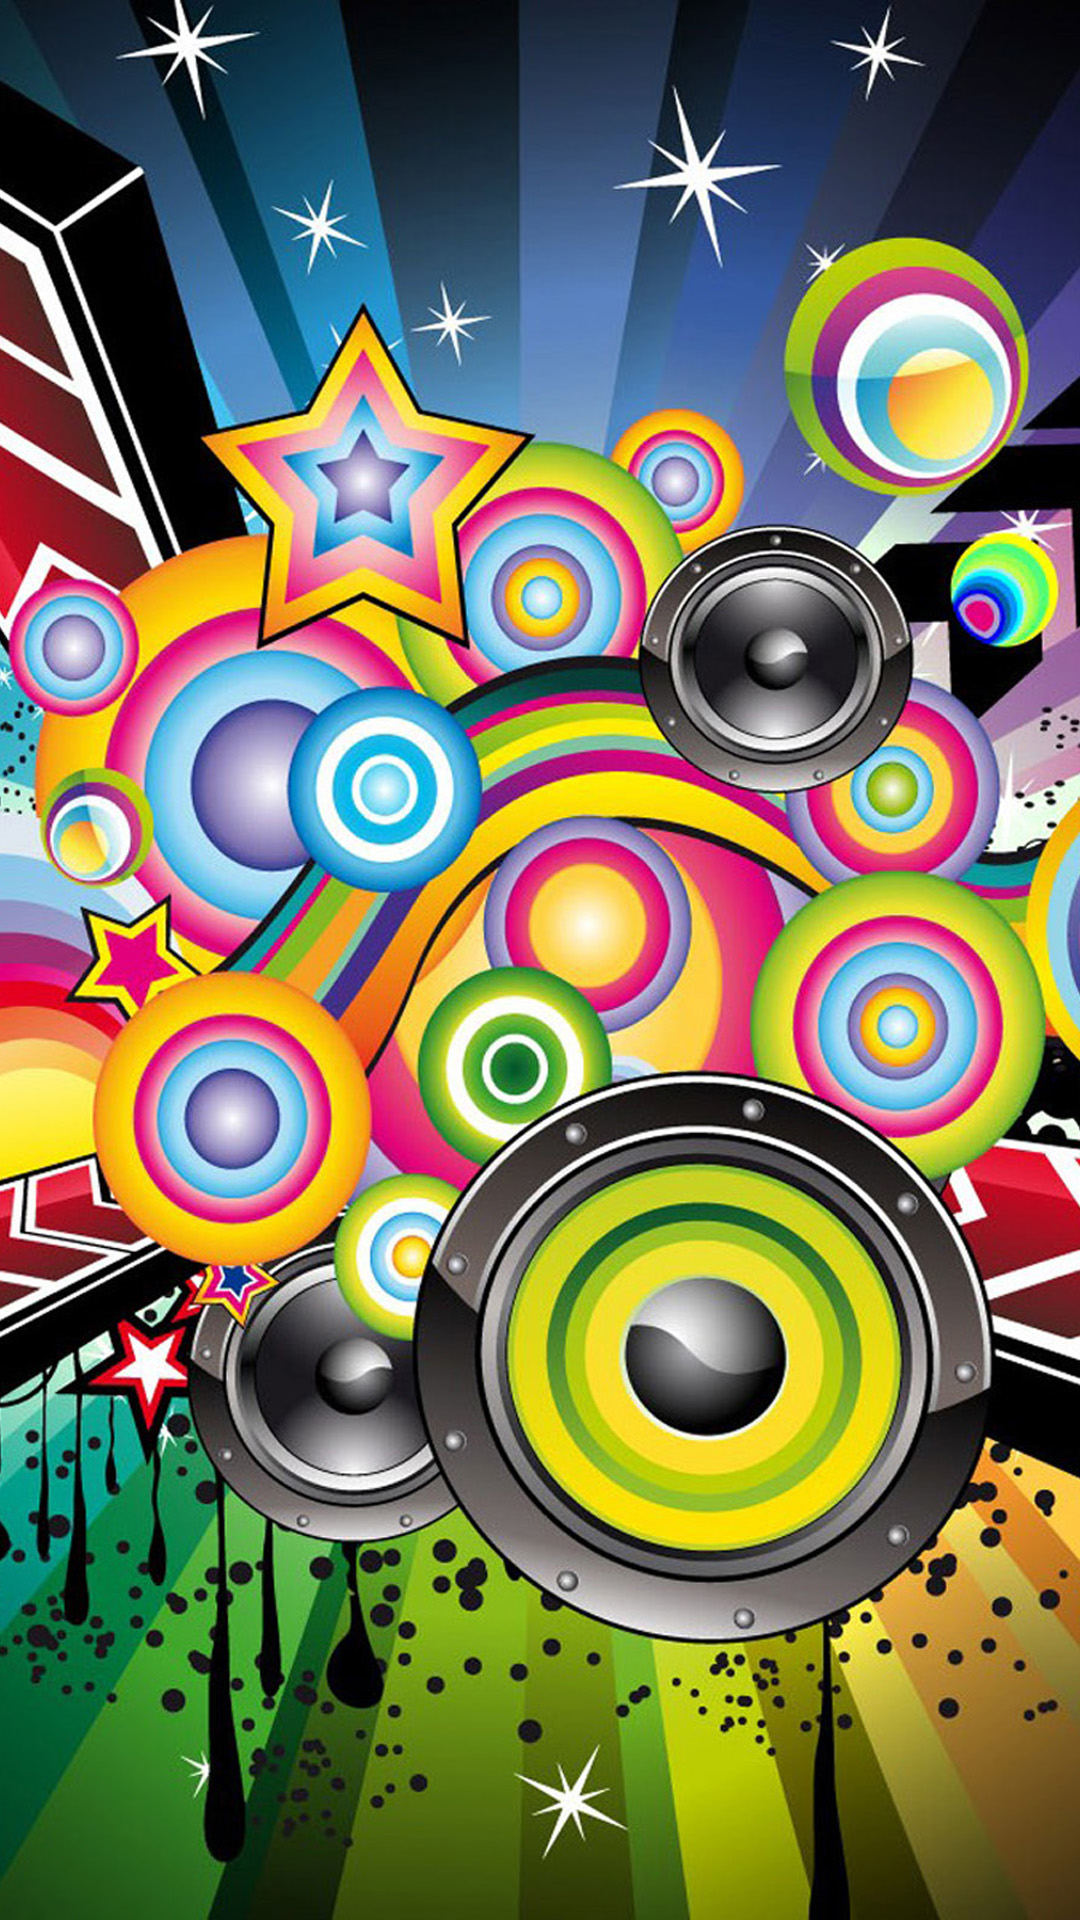 hd music wallpapers for android,psychedelic art,graphic design,design,games,circle